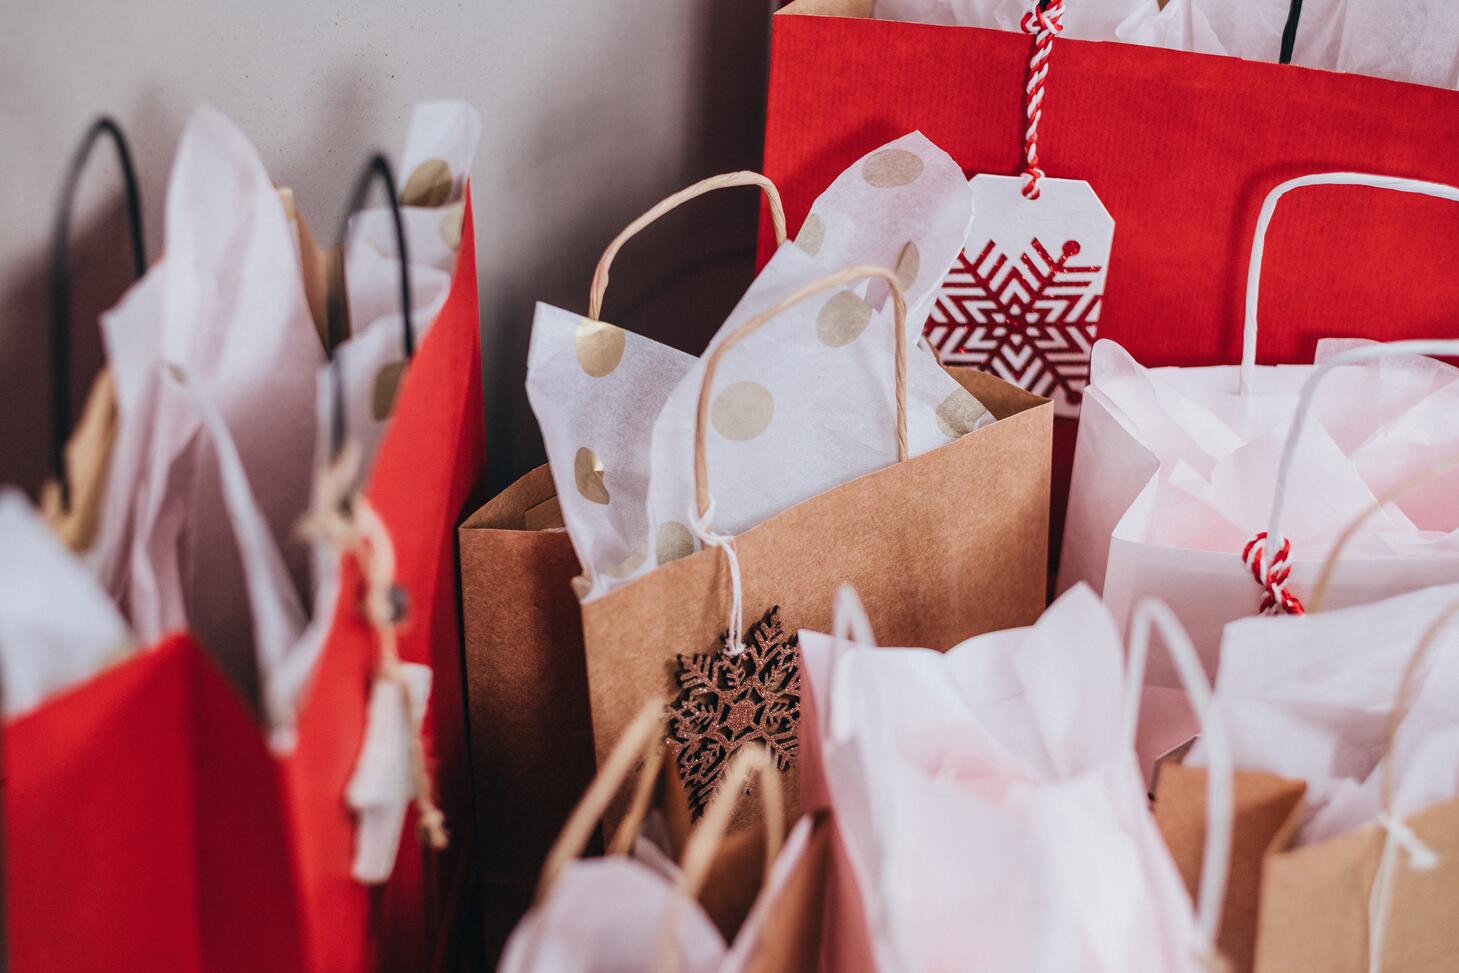 Shallow focus photography of paper bags photo – Free Christmas Image on Unsplash